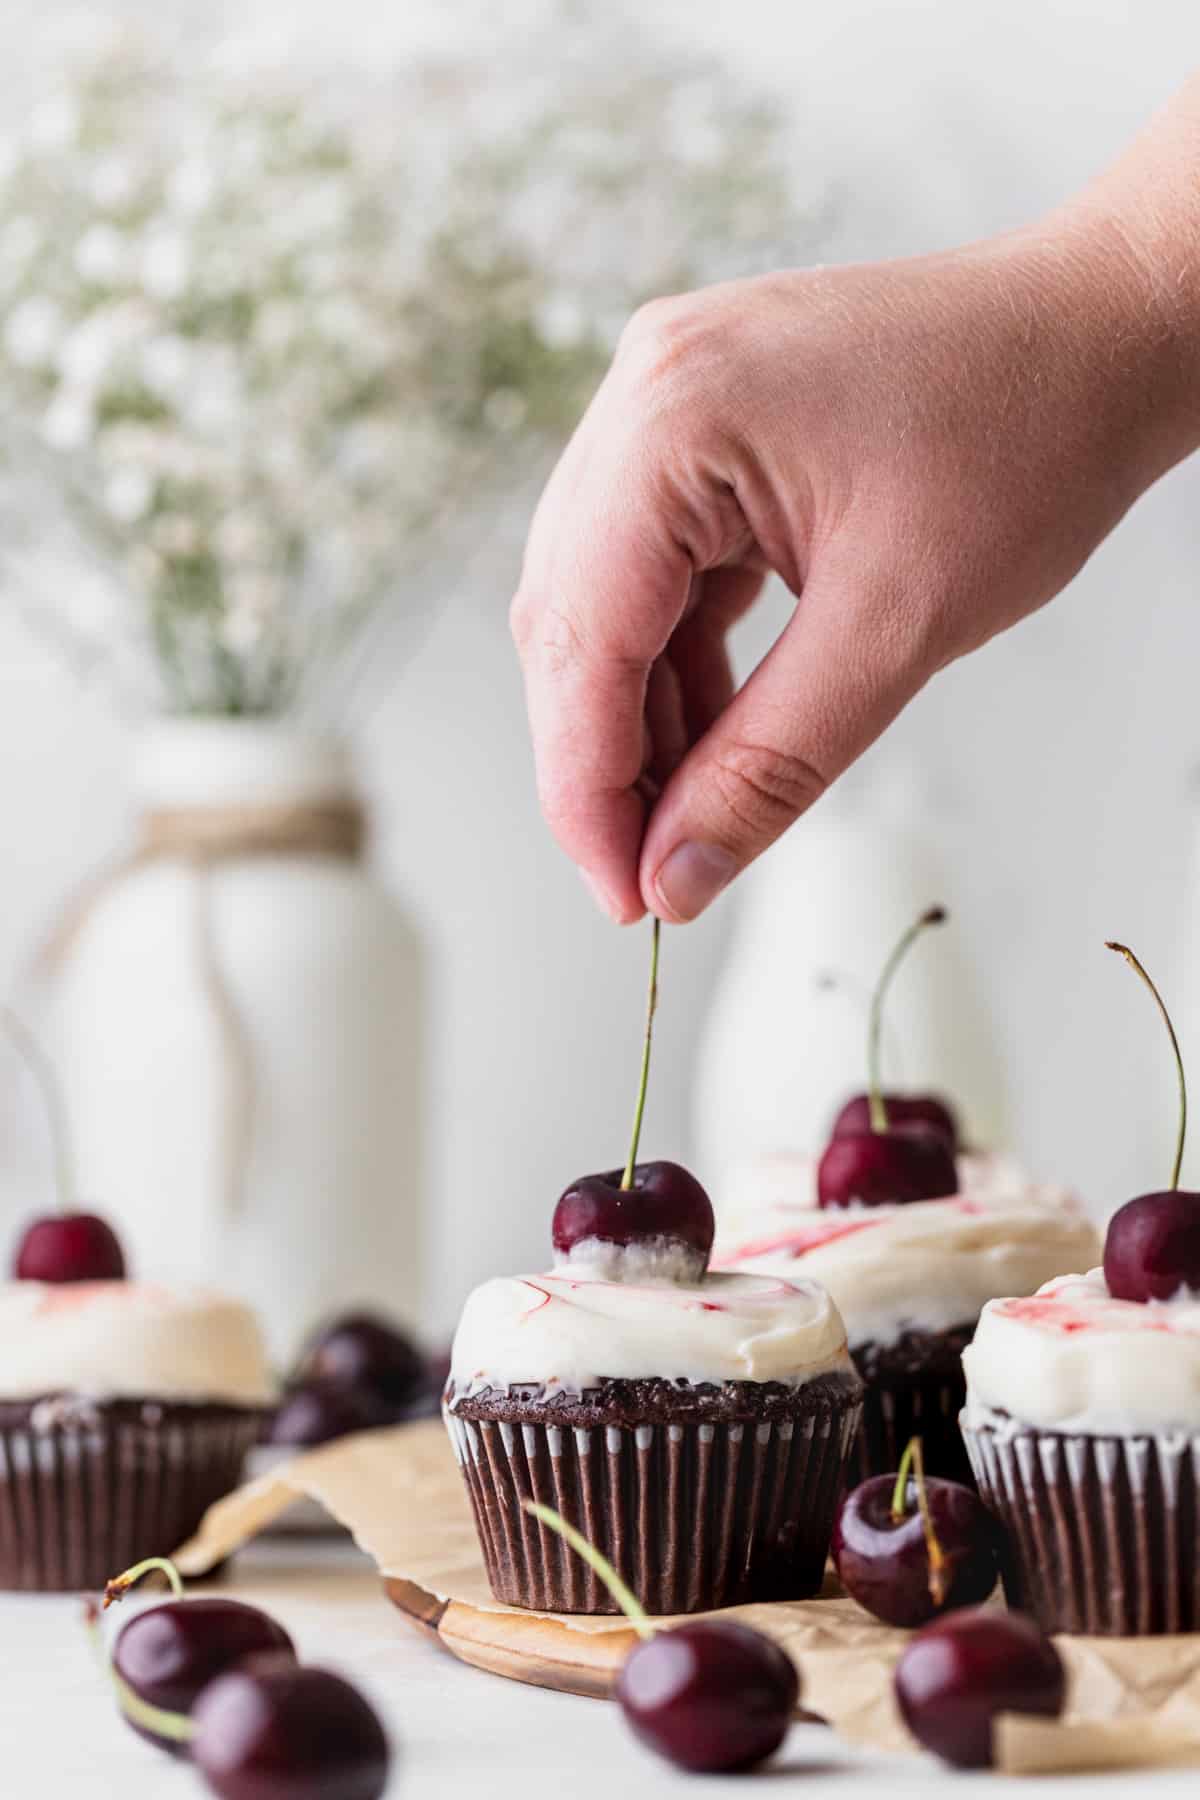 Topping the black forest cupcake with a cherry.